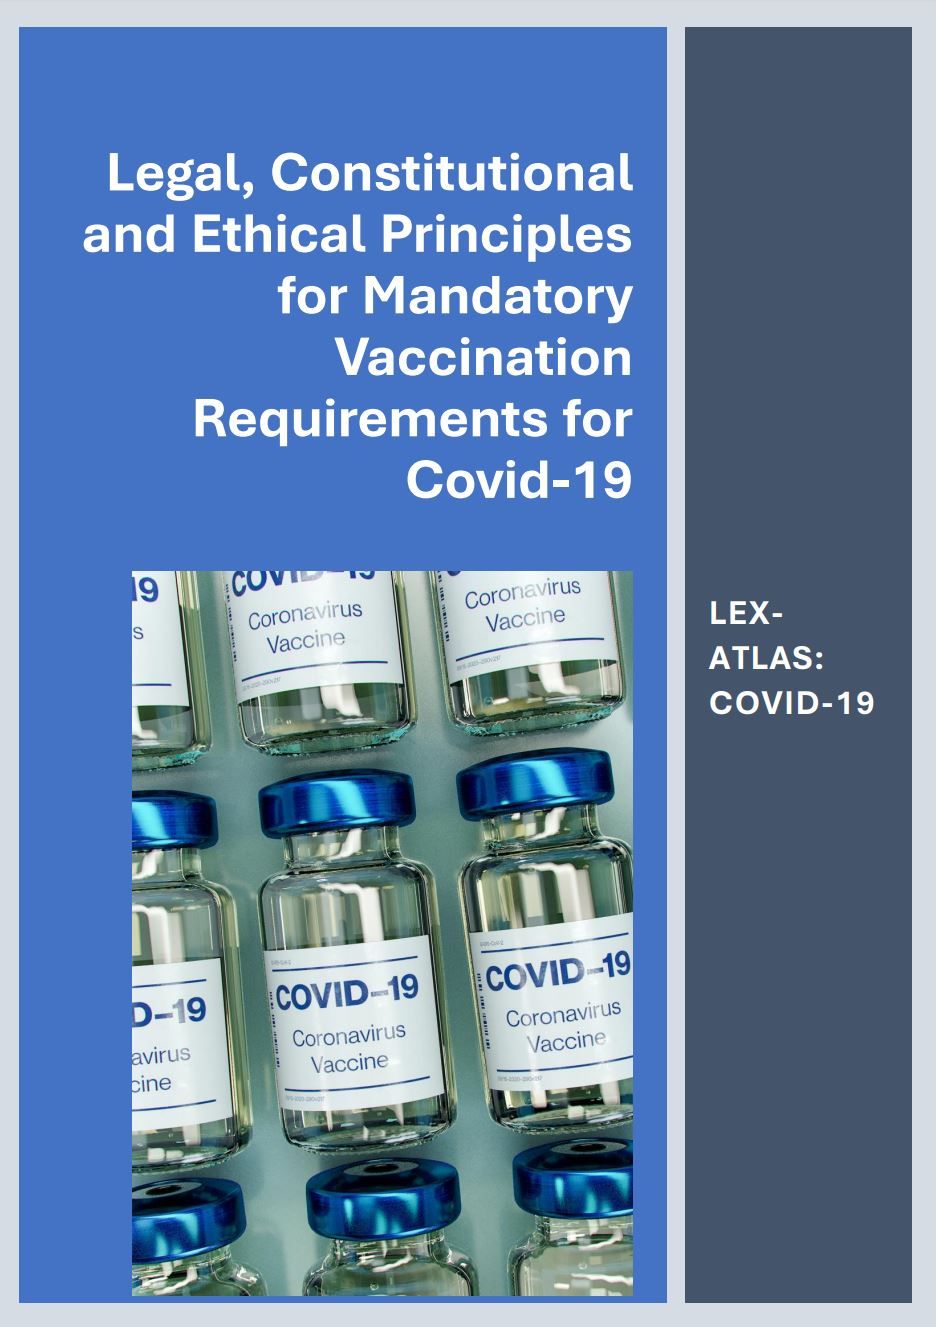 Legal, Constitutional and Ethical Principles for Mandatory Vaccination Requirements for Covid-19